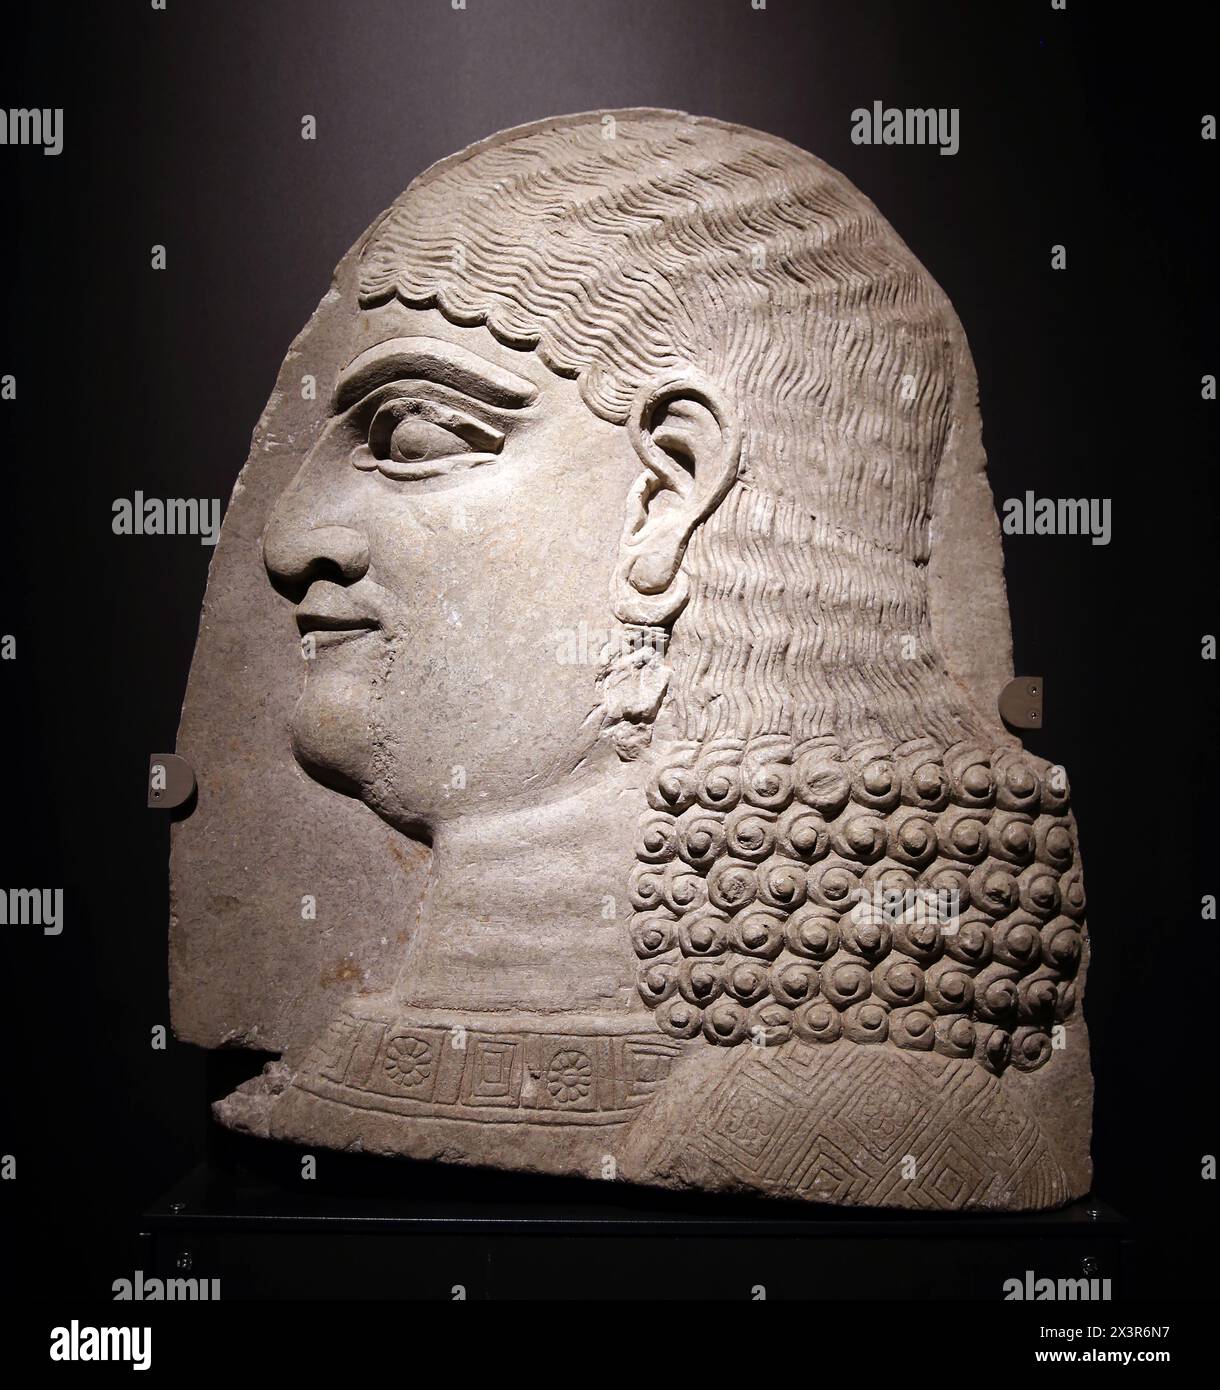 Court dignitary. Reign of Sargon II of Assyria (721-705 BC). Calcite alabaster. From Khorsabad, Palace of Sargón II. Musei Reali. Archaelogical Museum Stock Photo